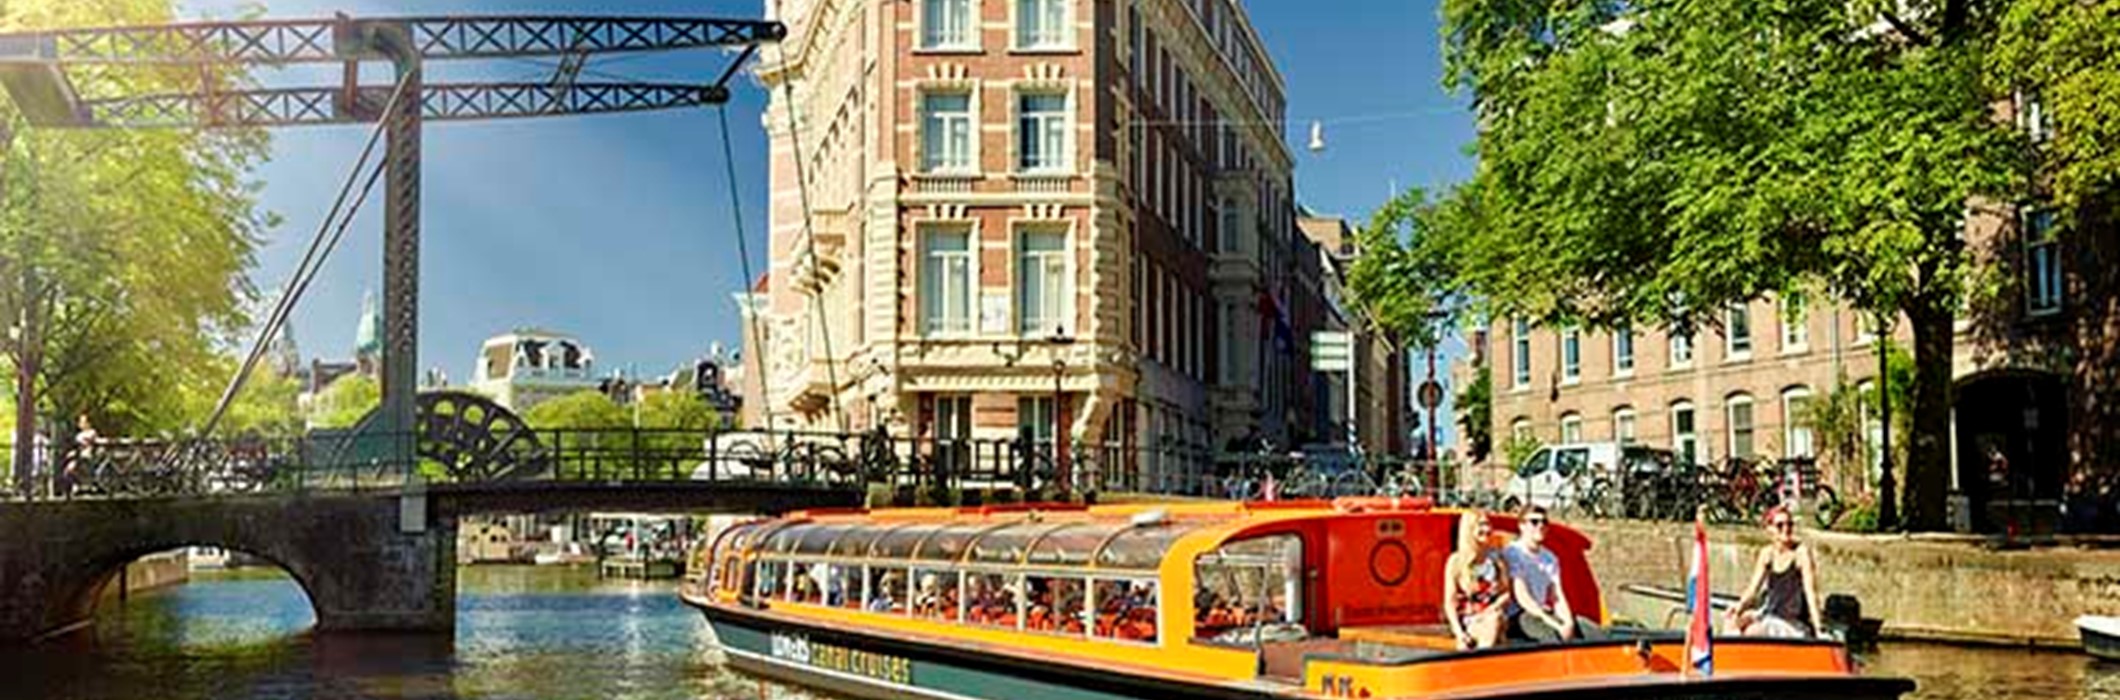 1 h. Amsterdam Day Canal Cruise (departs near the Rijksmuseum)